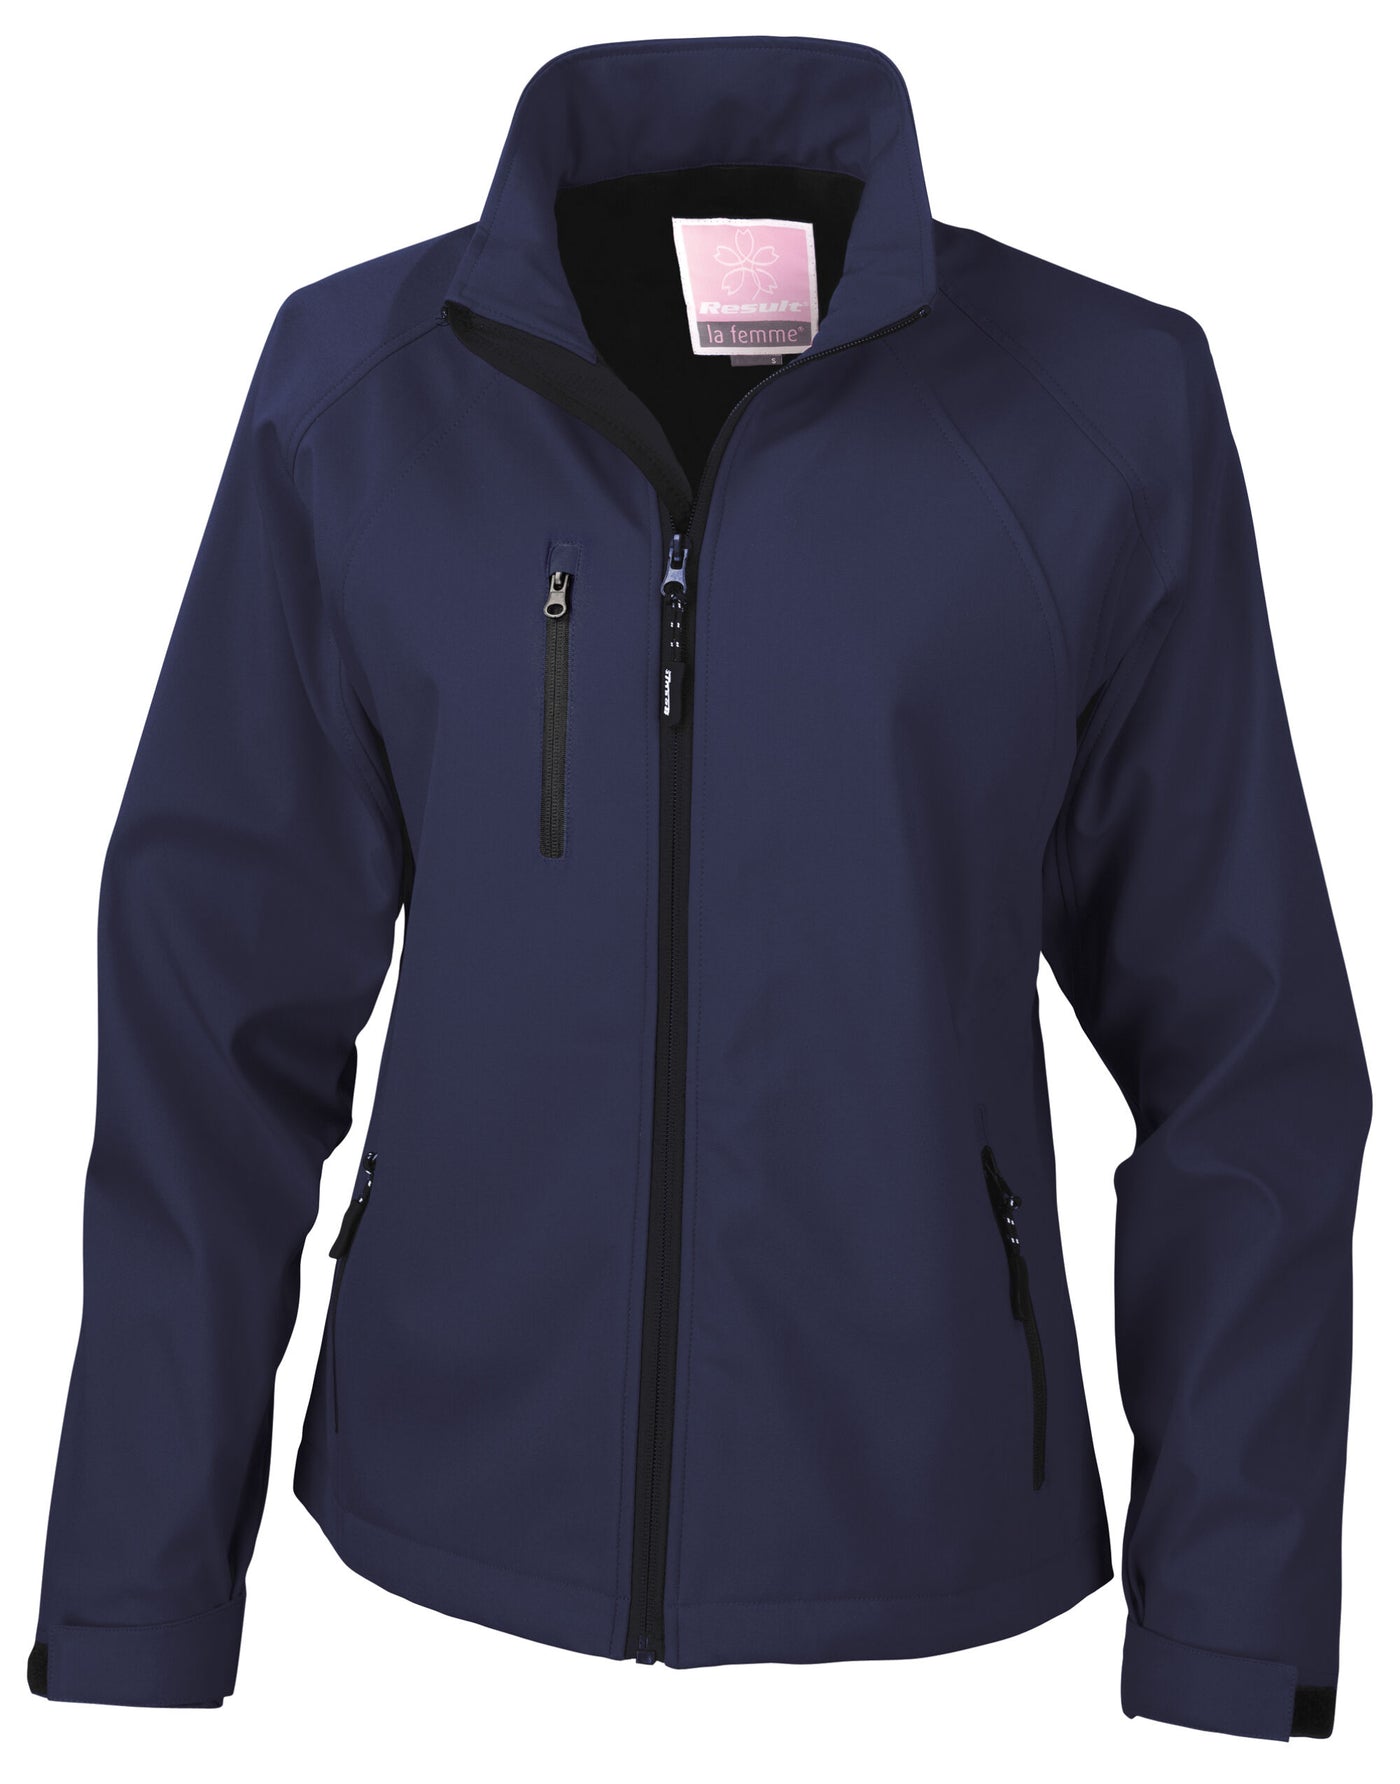 Ladies Soft Shell Jacket in Navy